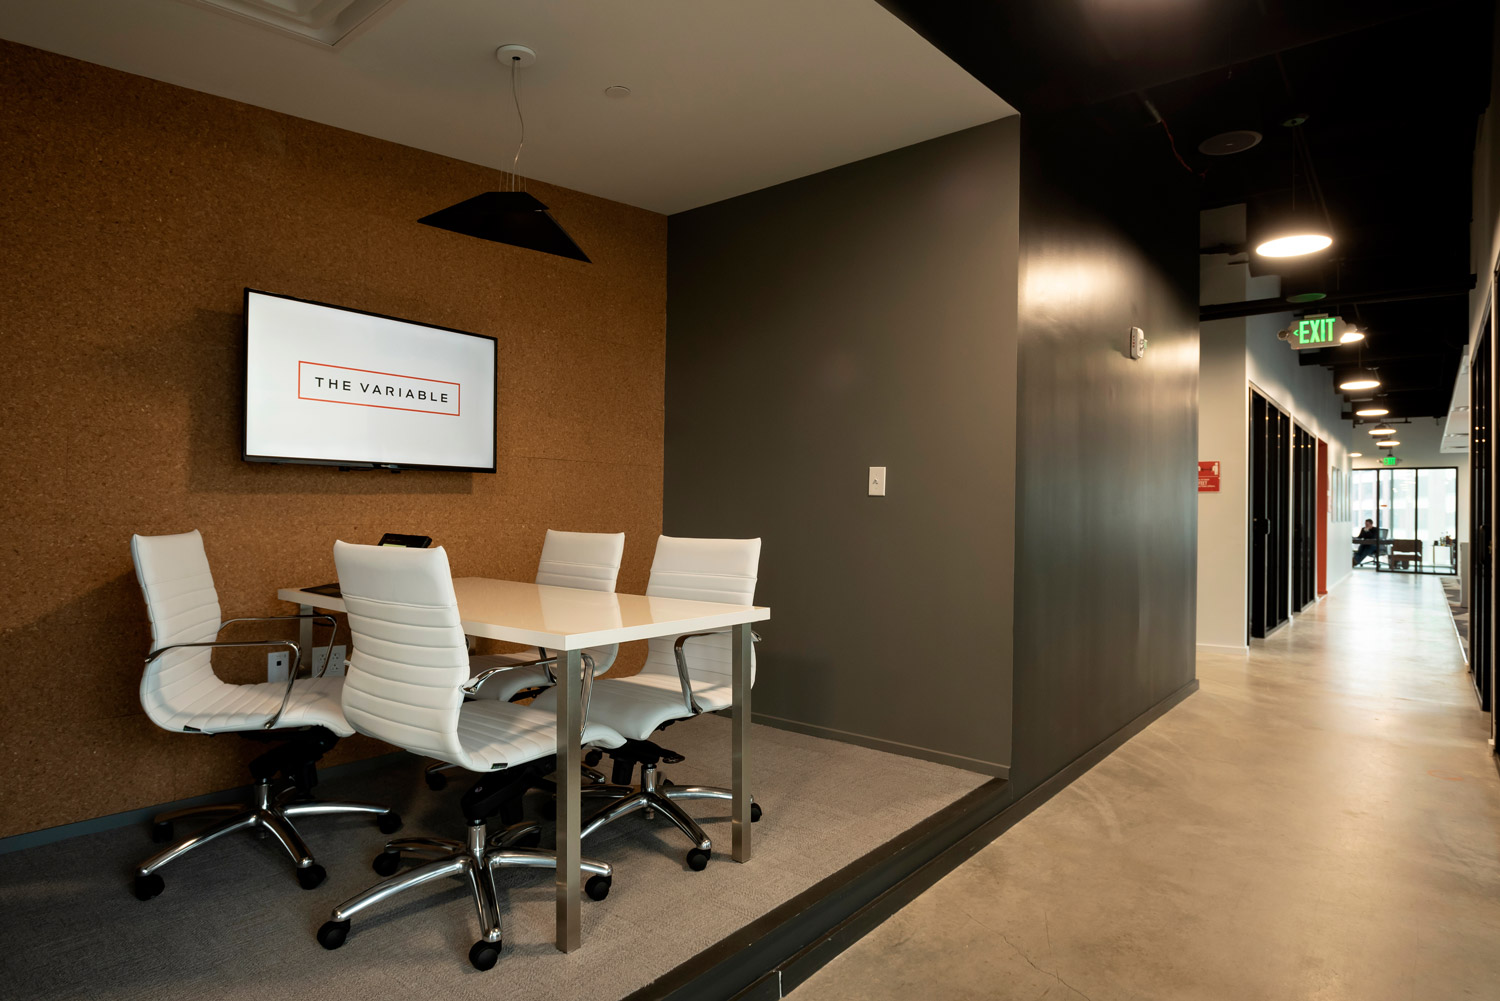 Thumbnail image of an office hallway with a conference table and a digital wall display.